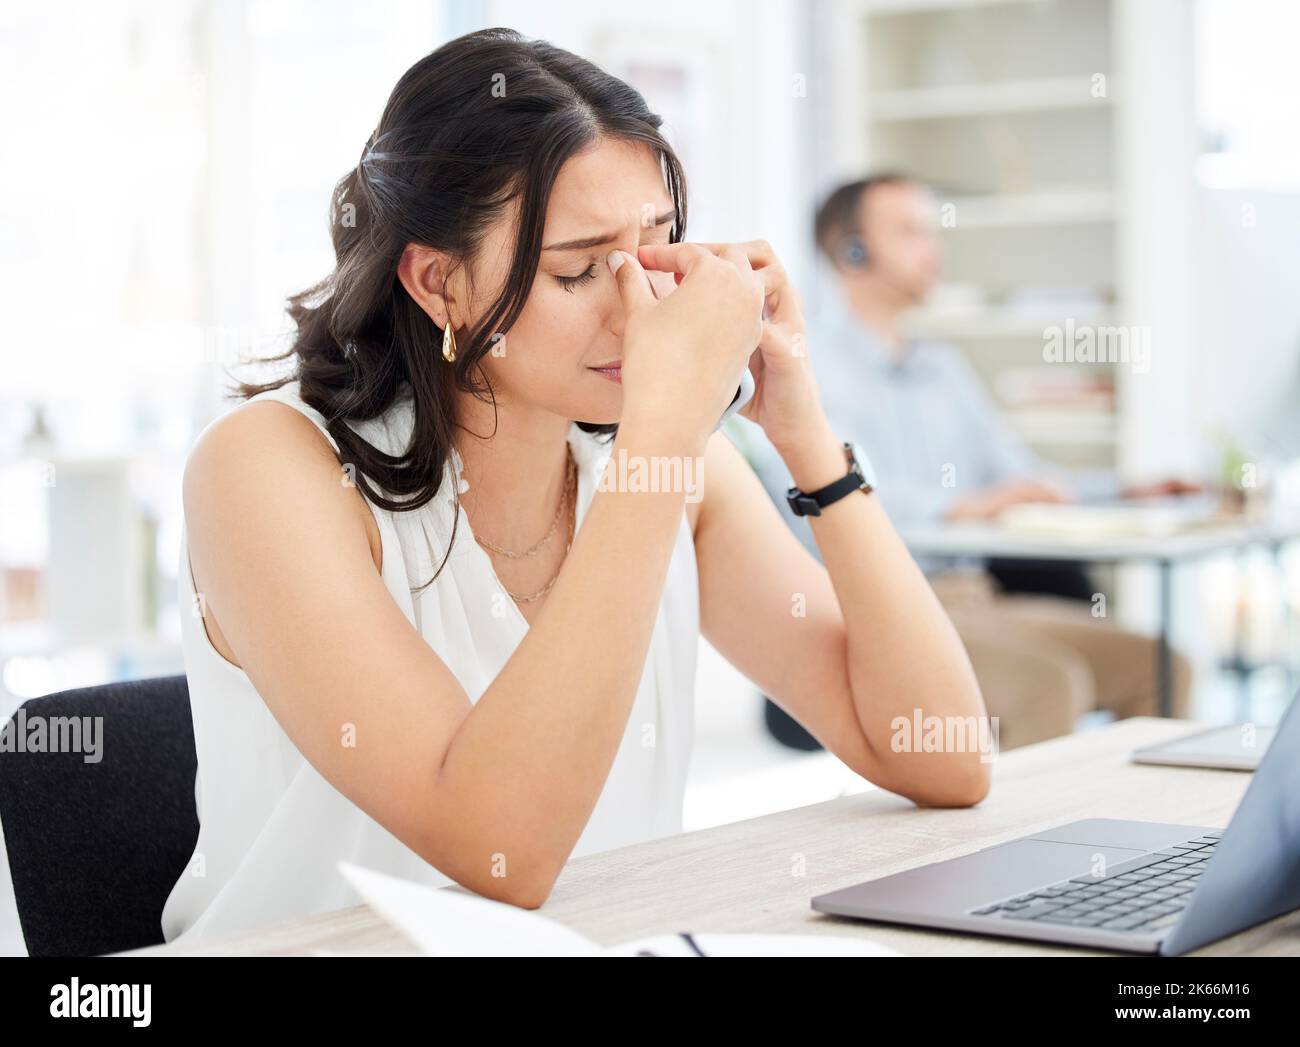 Im struggling hard today. a young businesswoman looking stressed out while talking on a cellphone in an office. Stock Photo